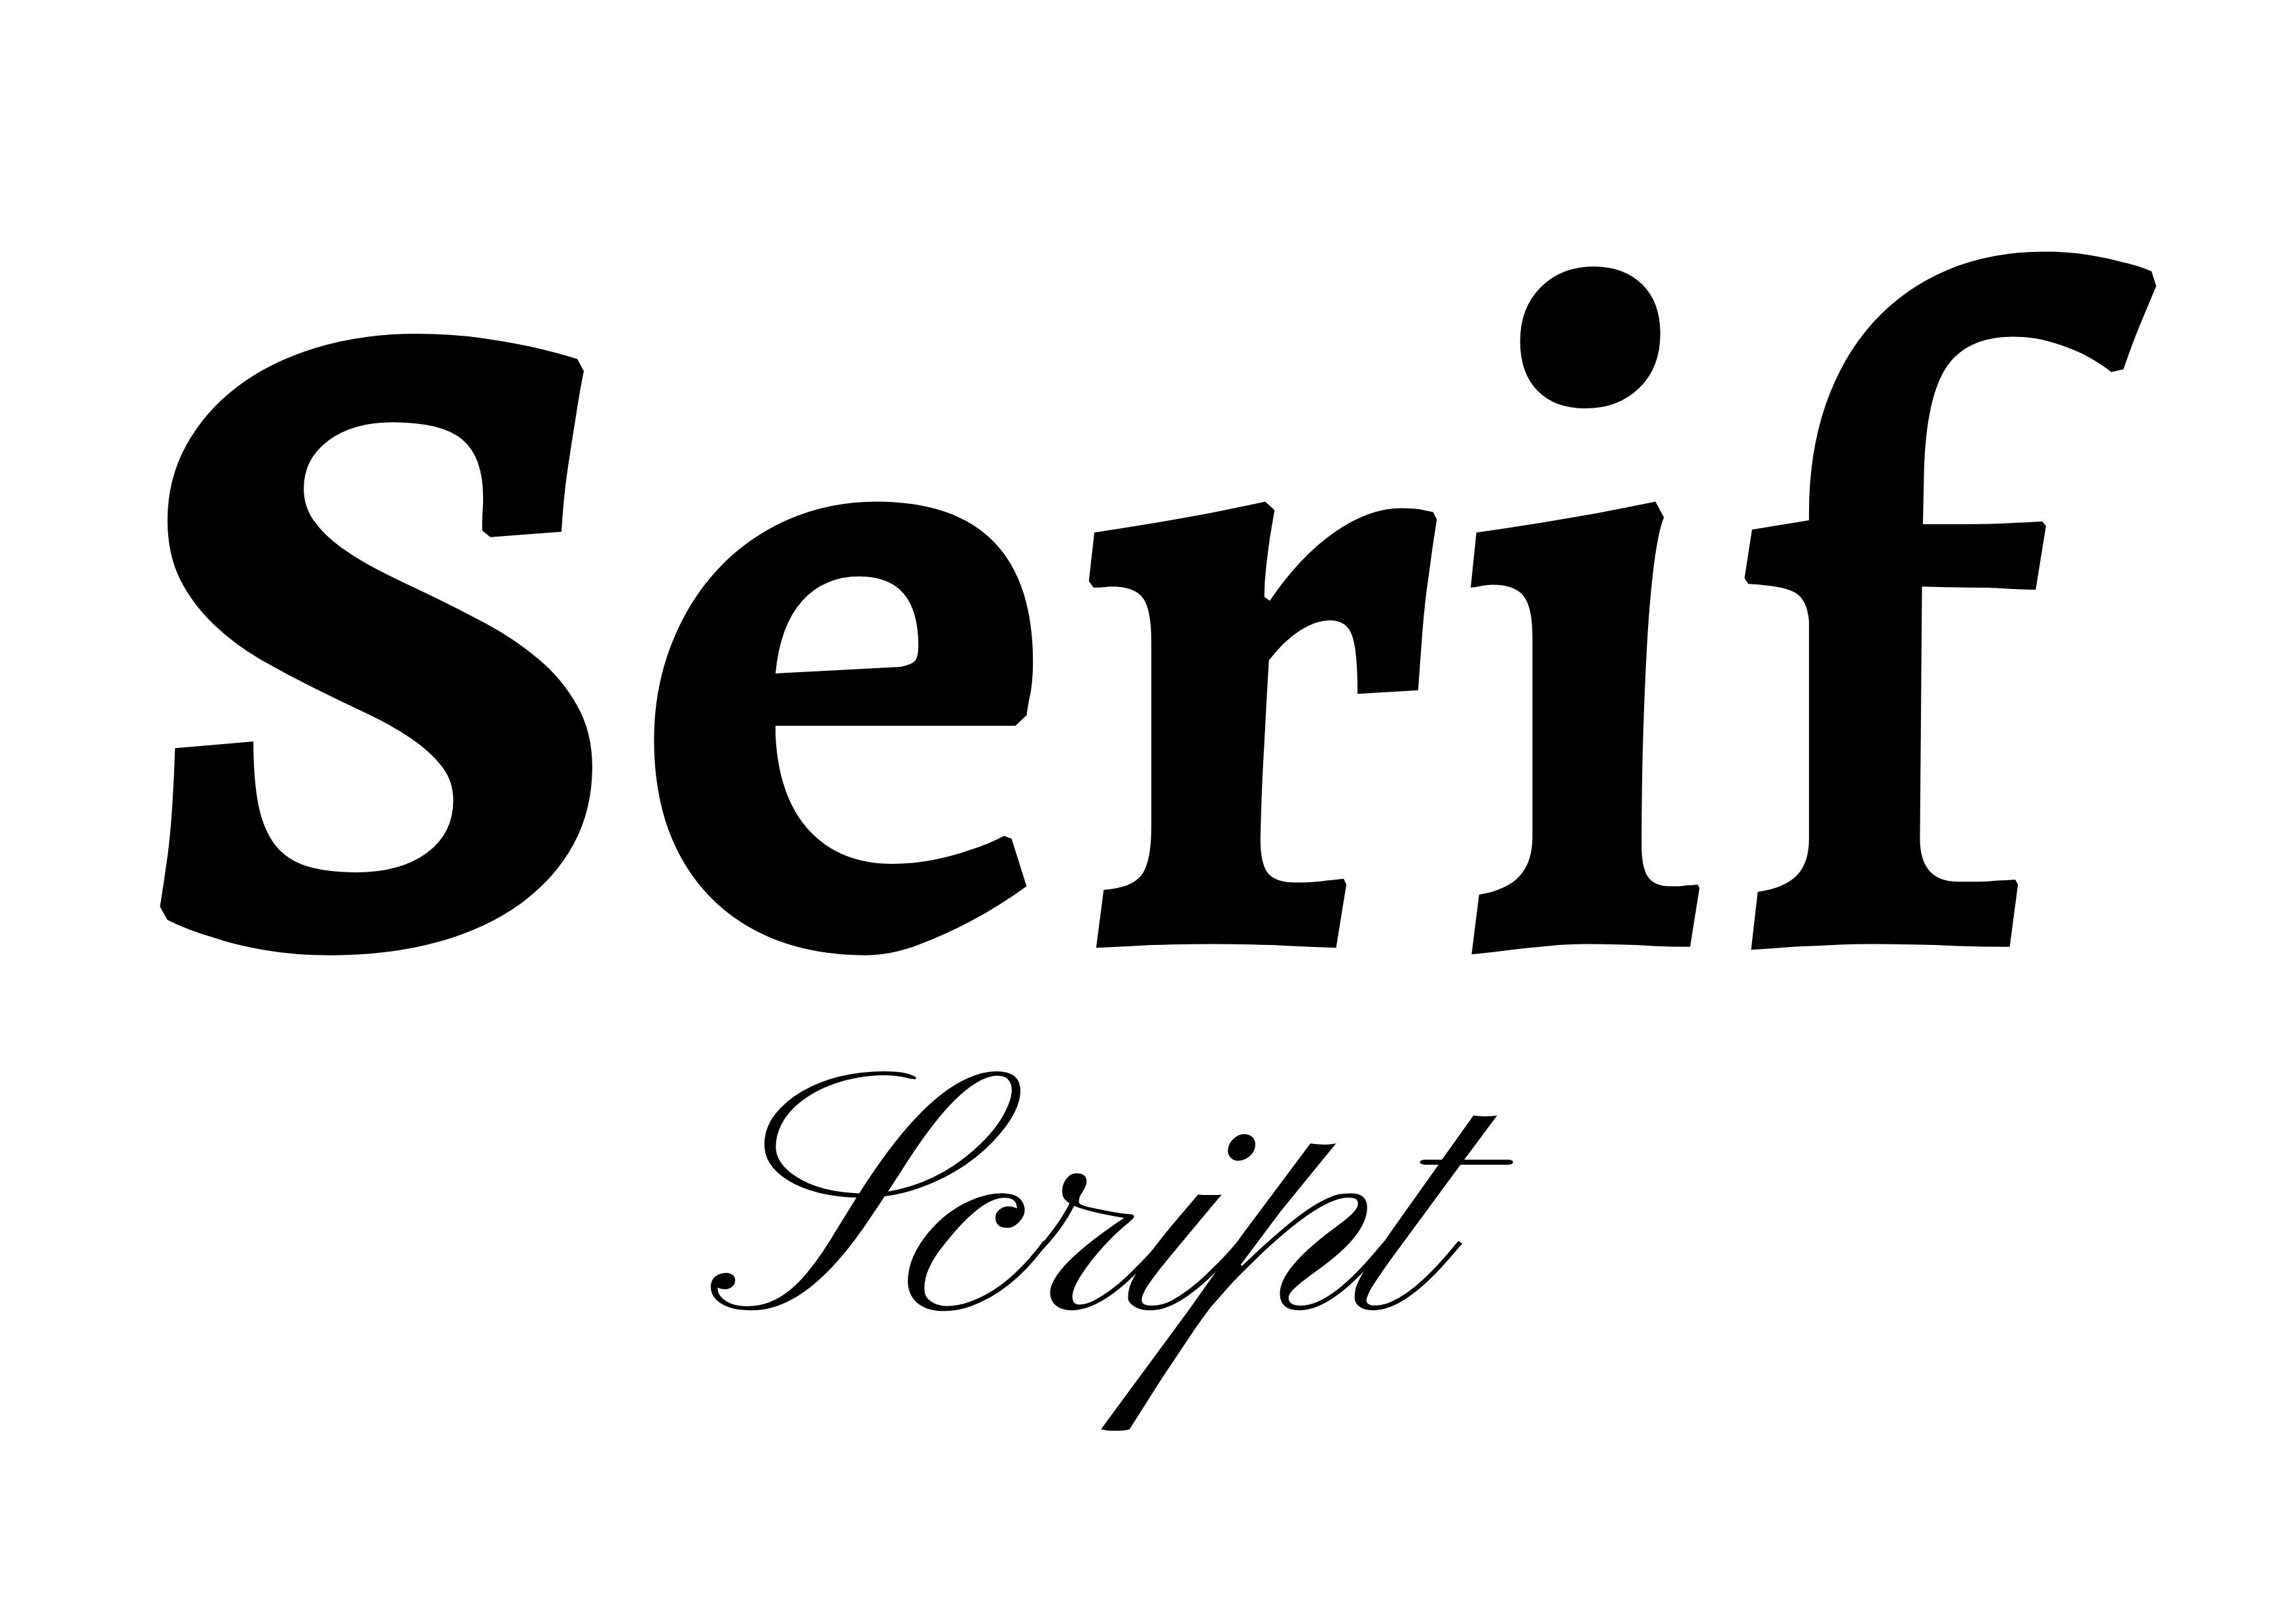 Font Pairing - 'Serif' in Bold Black in the centre with 'Script' in black underneath smaller - The complete guide to fonts: 5 essential types of fonts in typography - Image